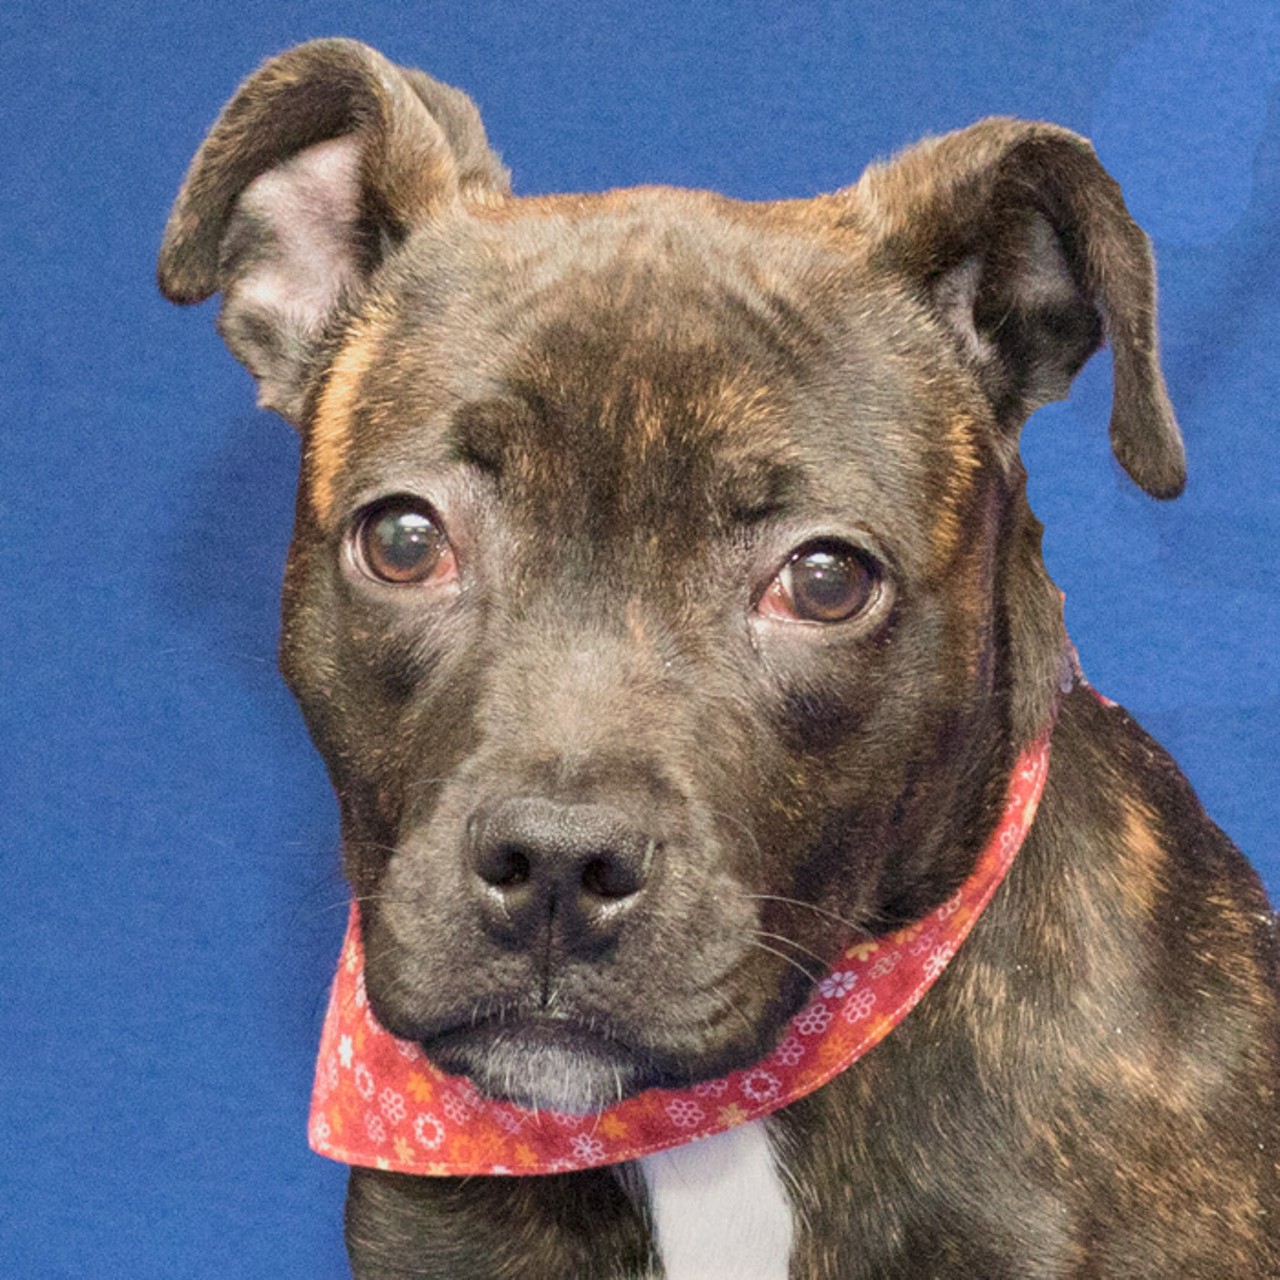  NAME: Marble
GENDER: Female
BREED: Pit Bull Terrier
AGE: 4 months
WEIGHT: 23 pounds (Projection: 55-80 pounds)
SPECIAL CONSIDERATIONS: None
REASON I CAME TO MHS: Homeless in Canton
LOCATION: Berman Center for Animal Care in Westland
ID NUMBER: 863115